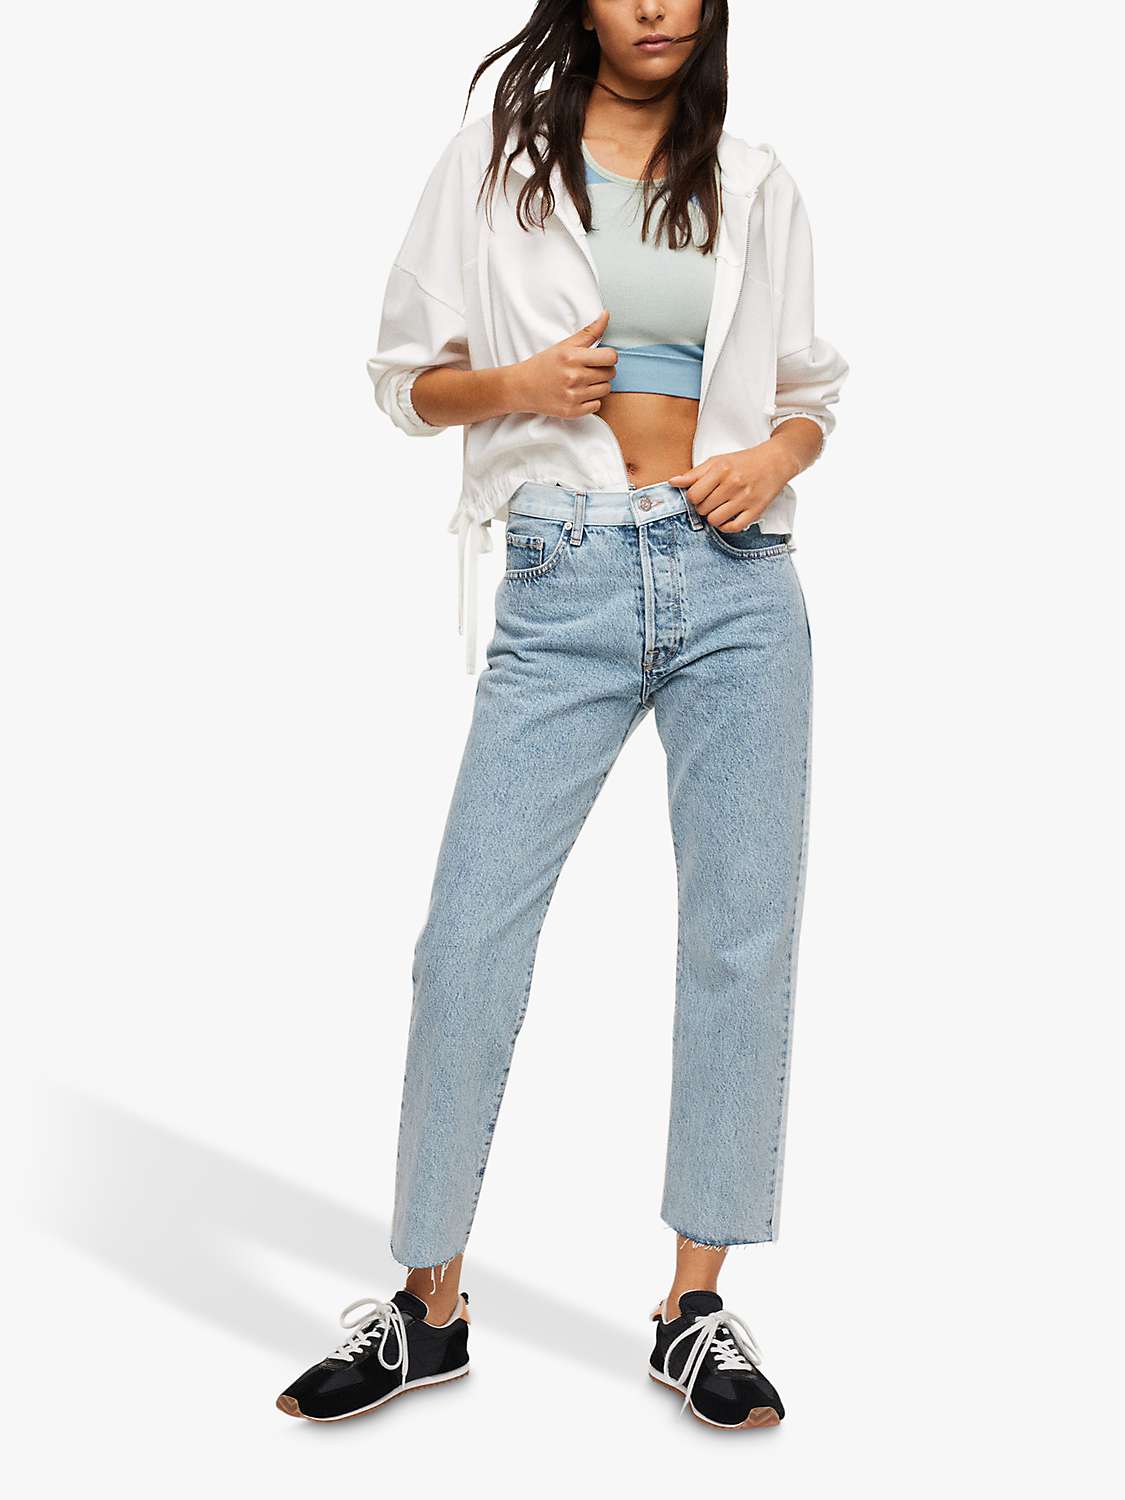 Mango Combined Style Frayed Jeans, Blue at John Lewis & Partners